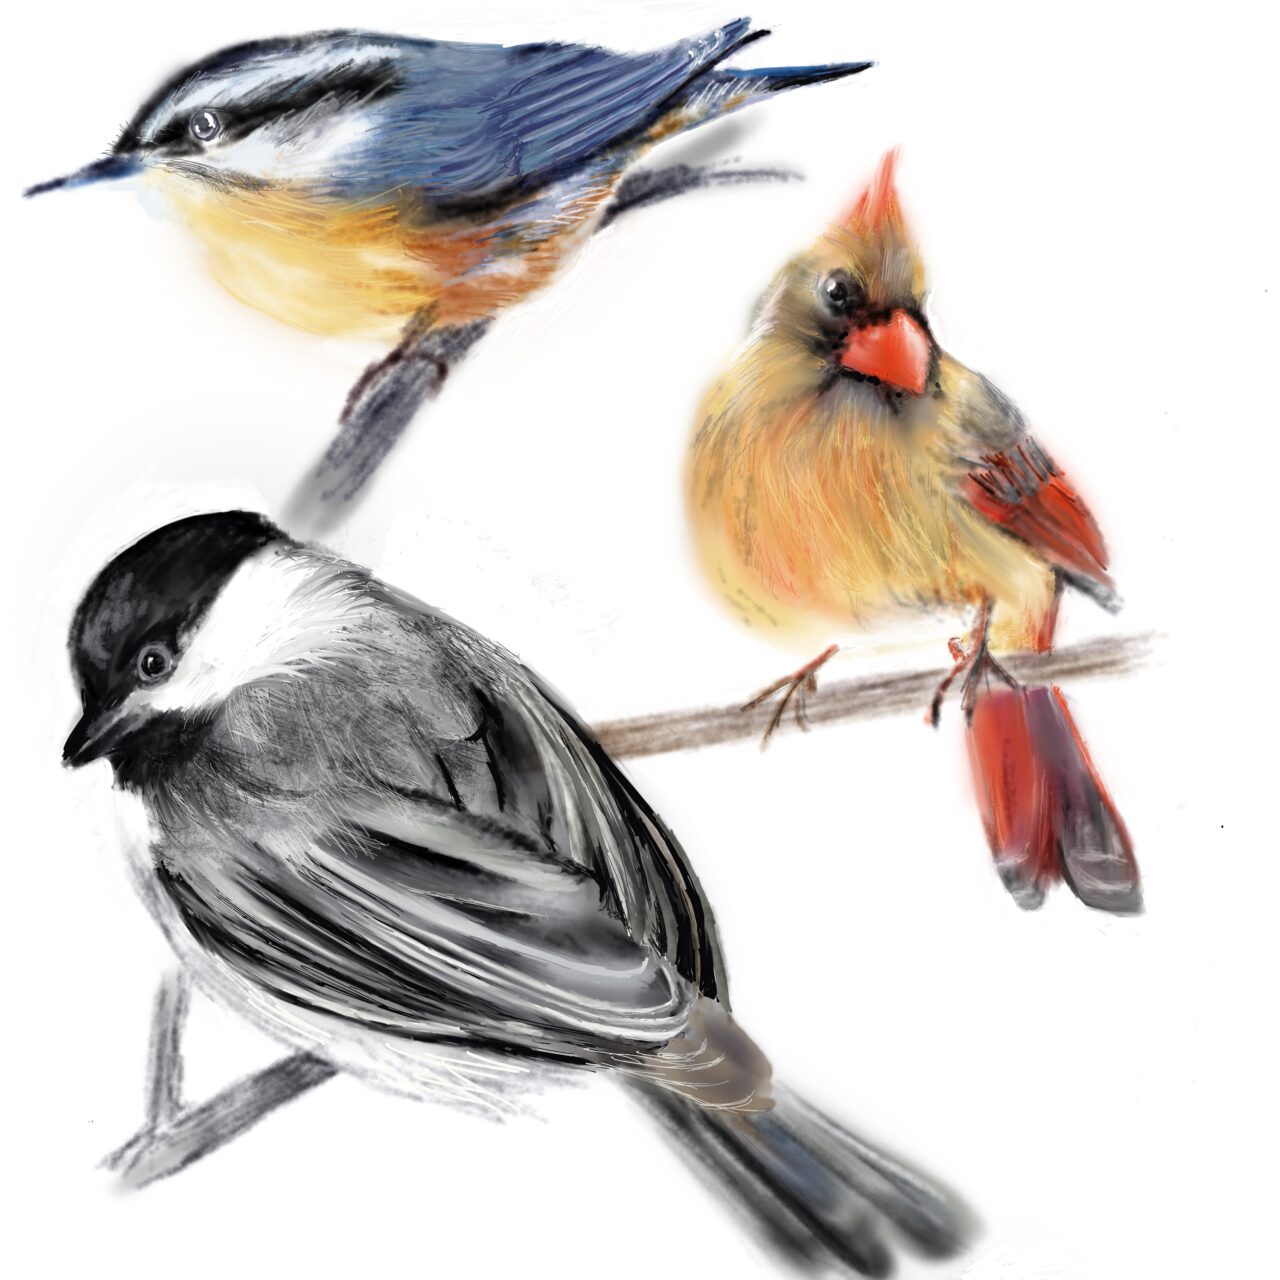 Black-capped Chickadee, Red-breasted Nuthatch, and Northern Cardinal by Marta Wohrle